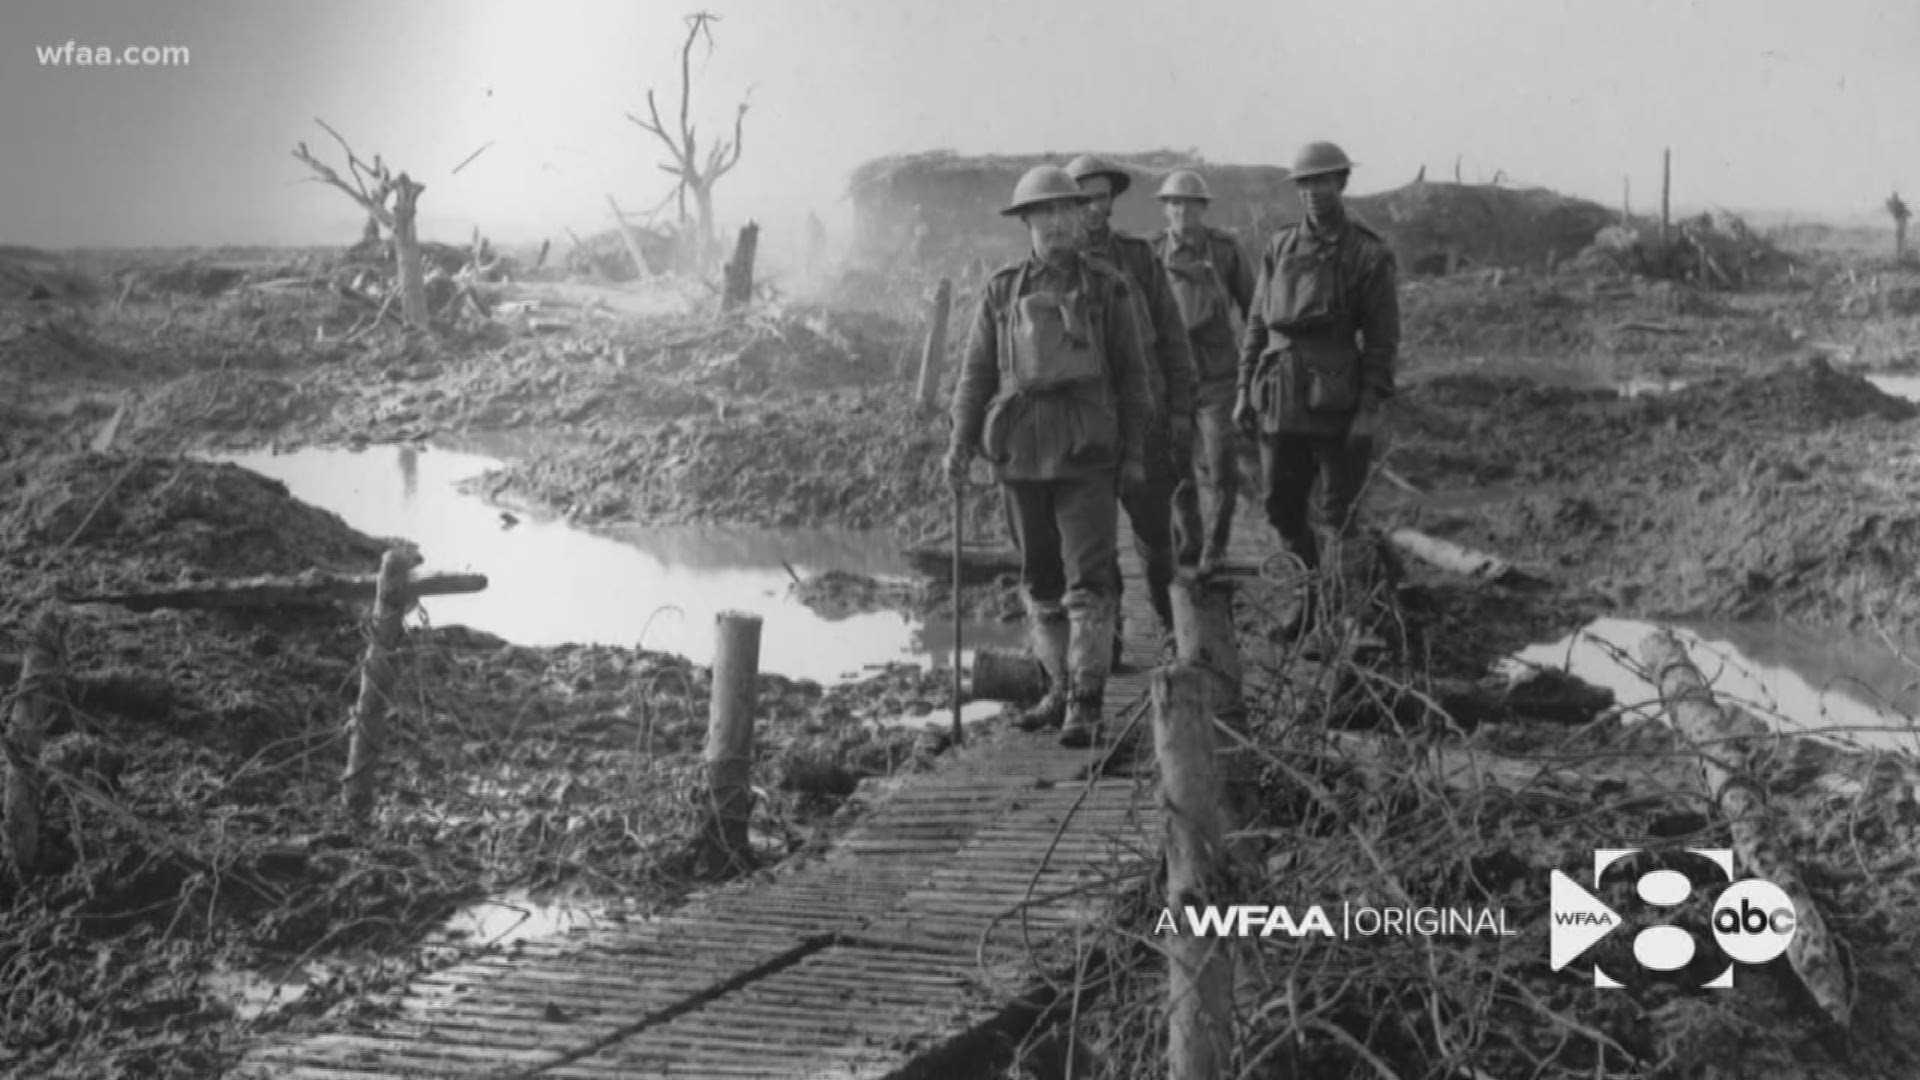 Using modern technology, a creative team from Dallas is part of a project to take people back in time more than a century and immerse them in a virtual WWI battle.